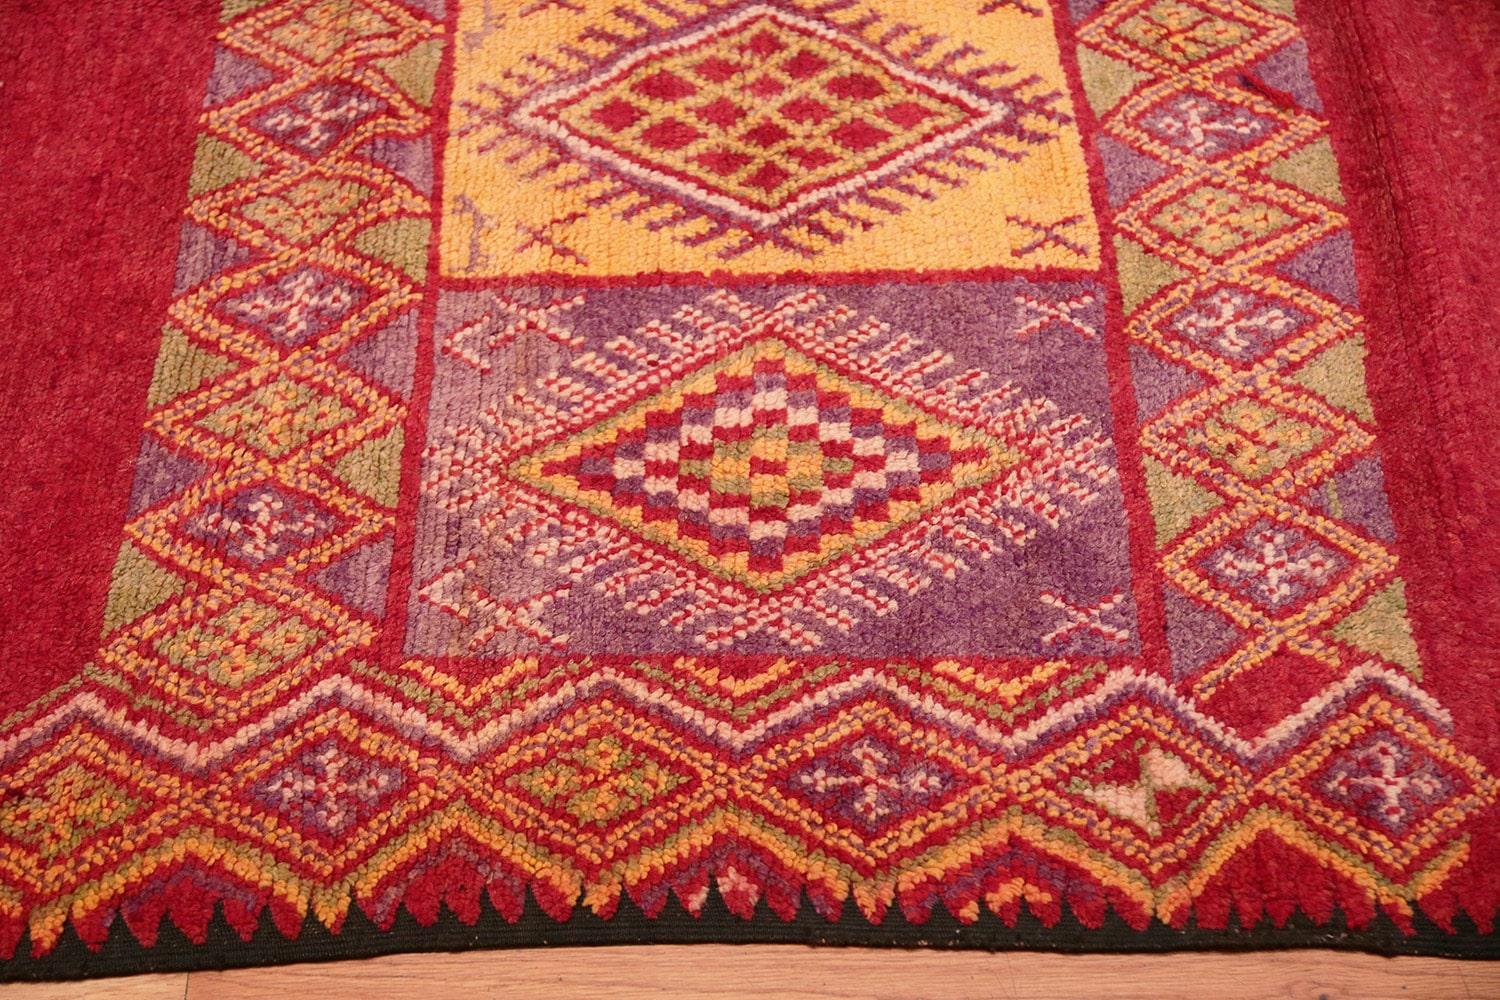 Vintage Moroccan Rug, Country Of Origin: Morocco, Circa date: Mid 20th Century, Size: 5 ft. 3 in x 16 ft. (1.6 m x 4.88 m)

